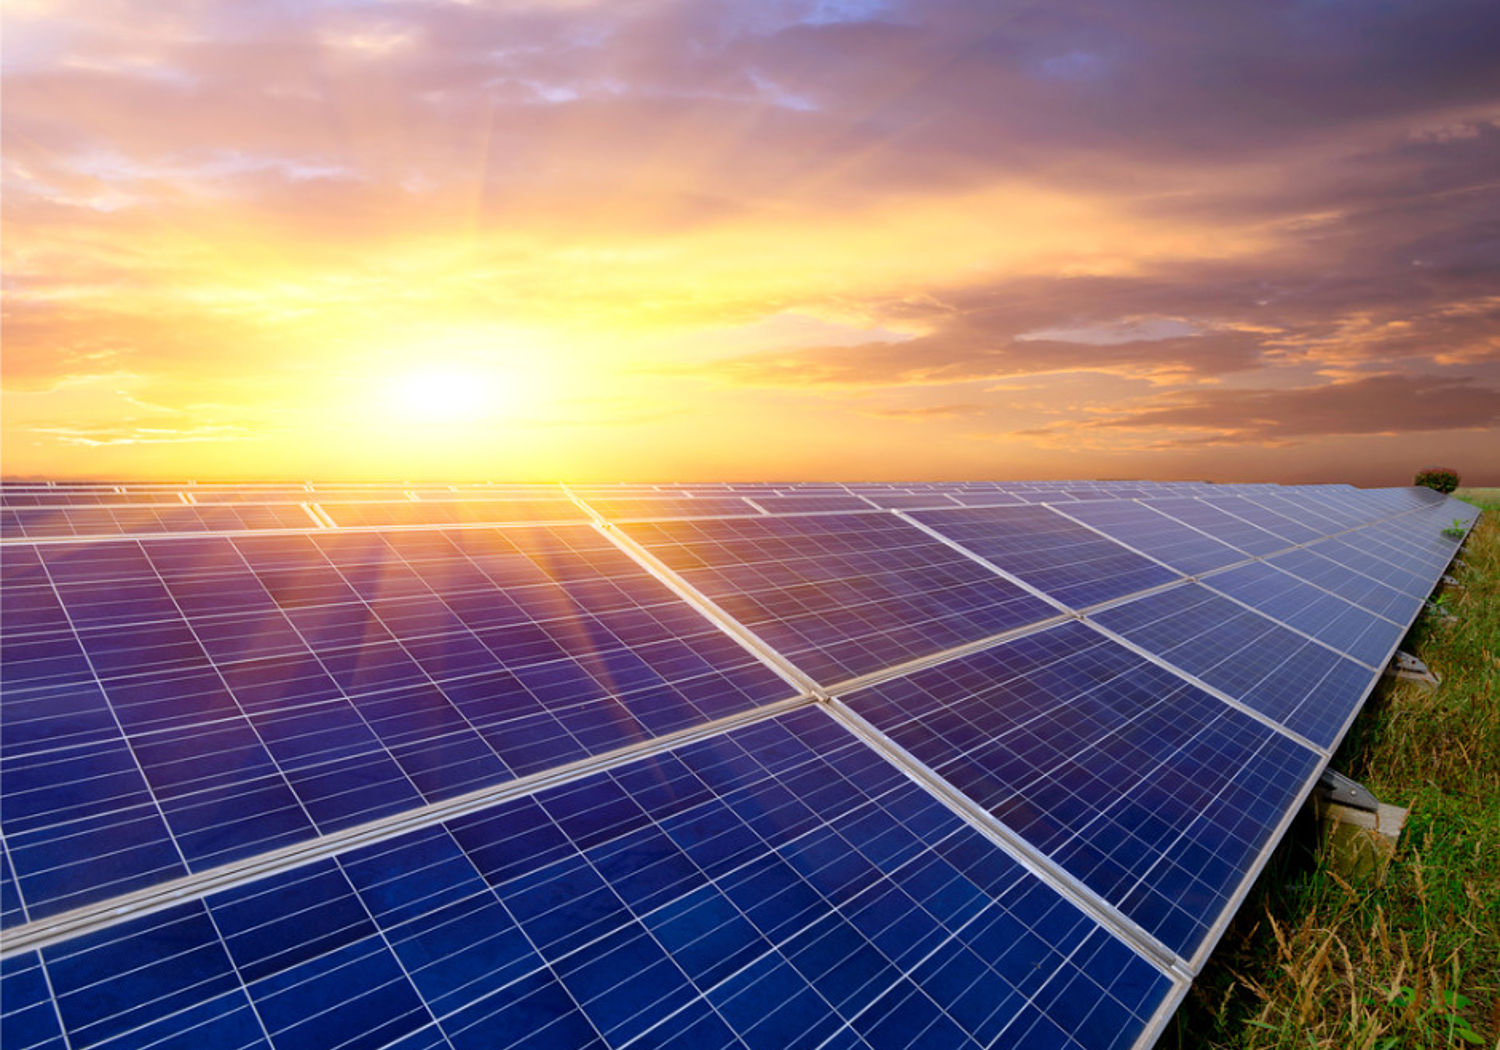 Image showing Photovoltaic cells in field at sunset